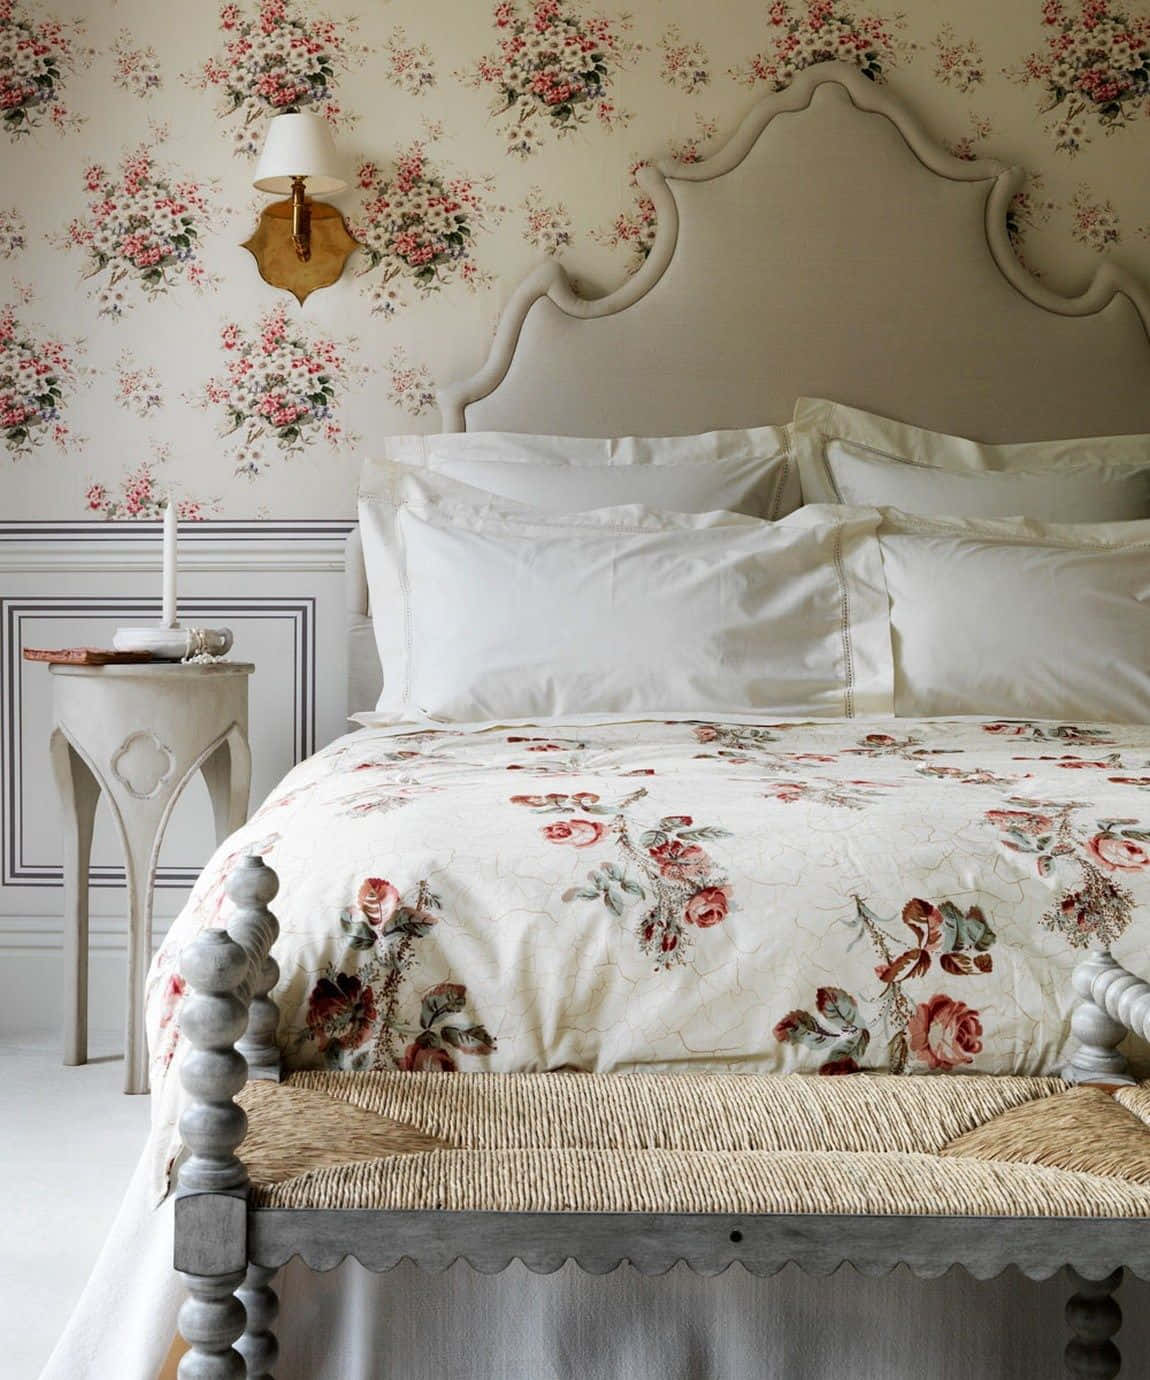 Floral Bed Linen And Wall